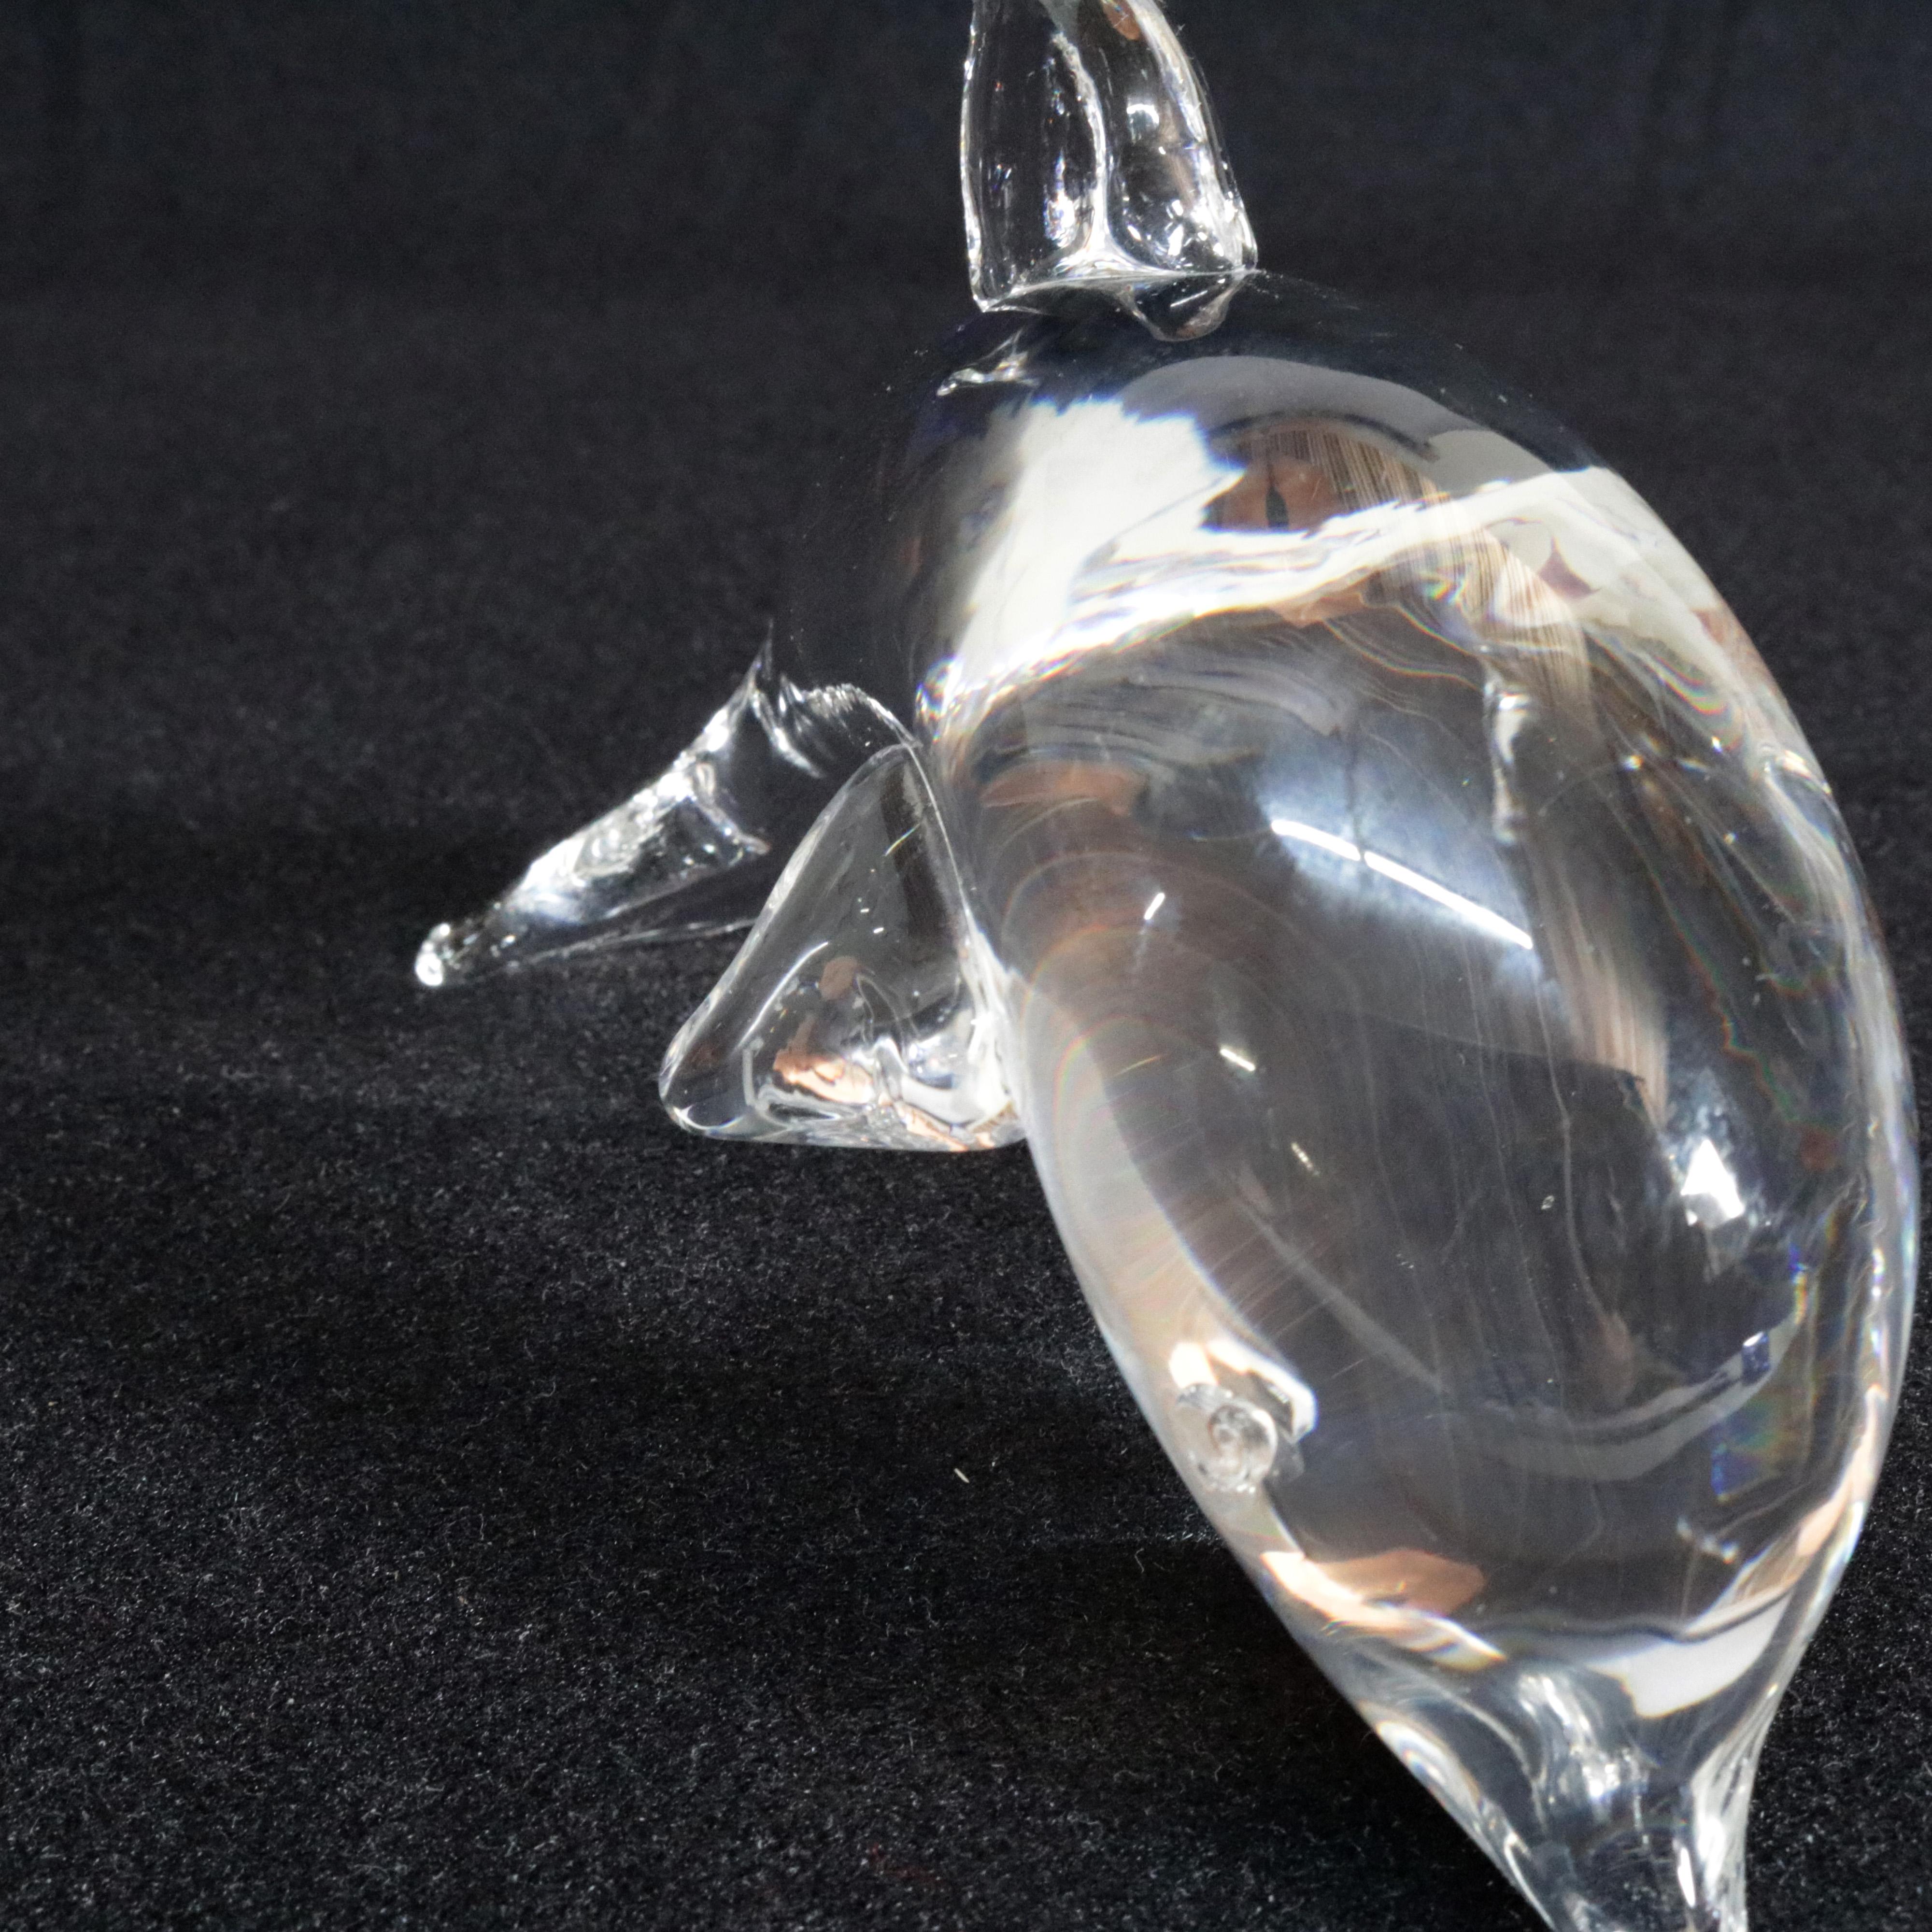 American Pair of Steuben Crystal Sculpture Paperweights of Dolphins, Lloyd Atkins, Signed